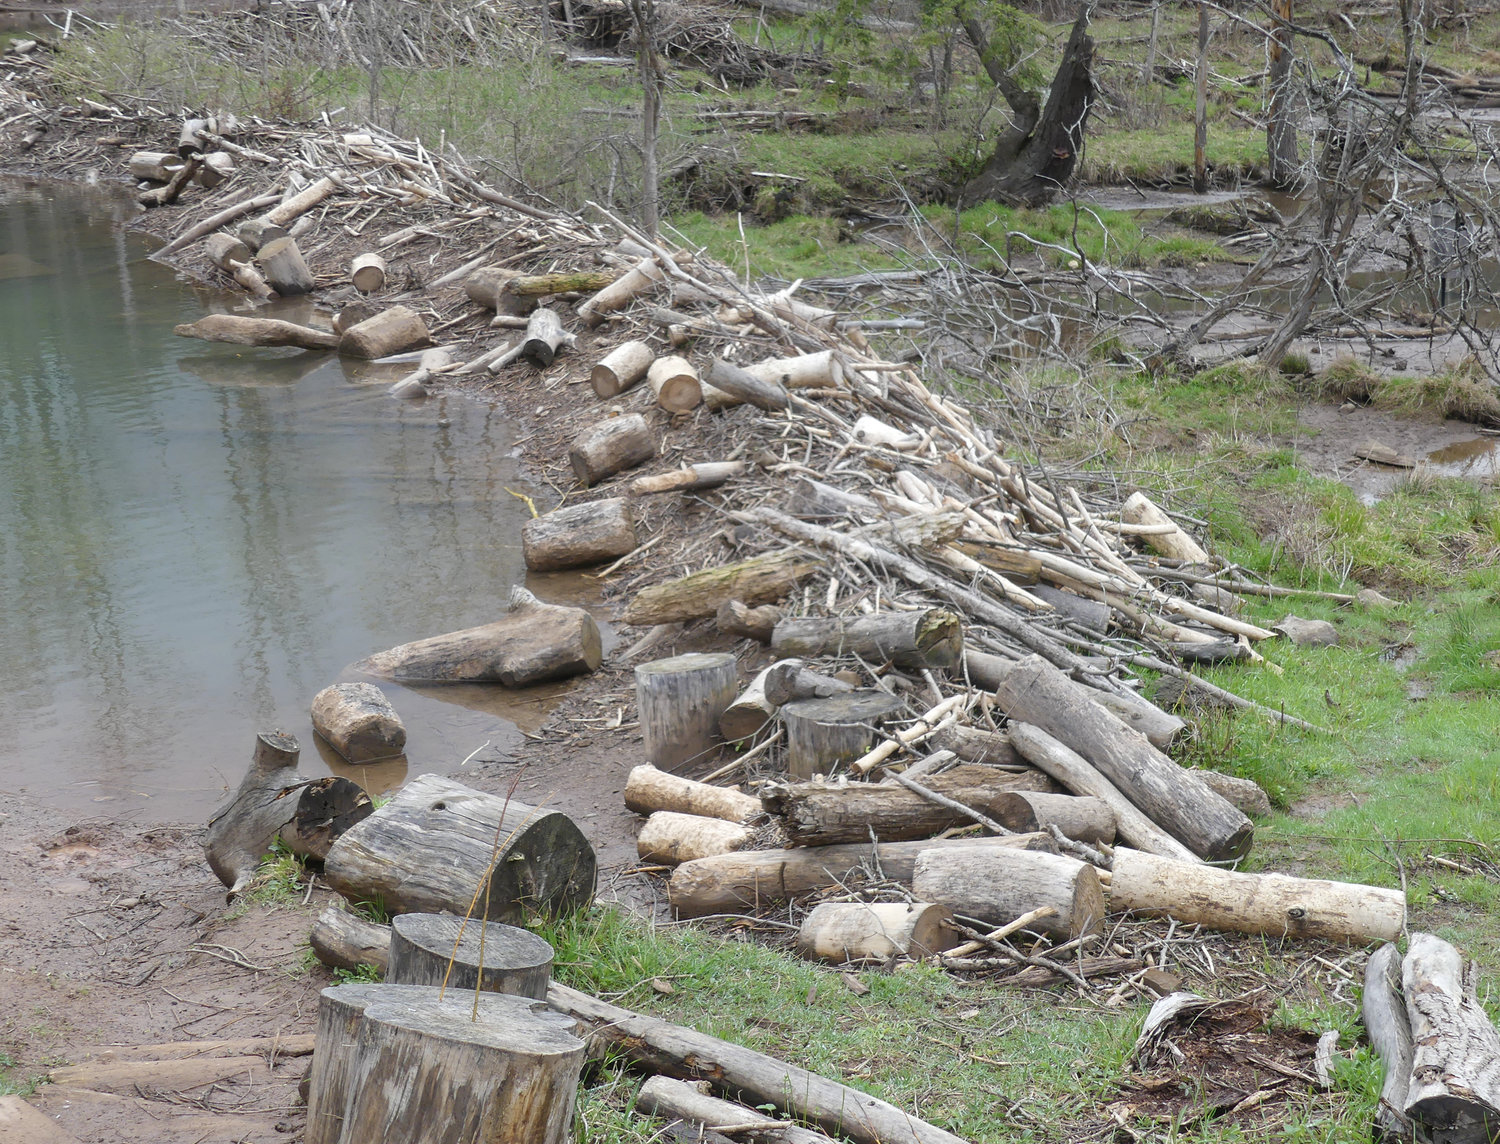 HARD LABOR — This wall constructed of logs is the result of all the handiwork of beavers who reside at the Spring Farm CARES Nature Sanctuary in Clinton.